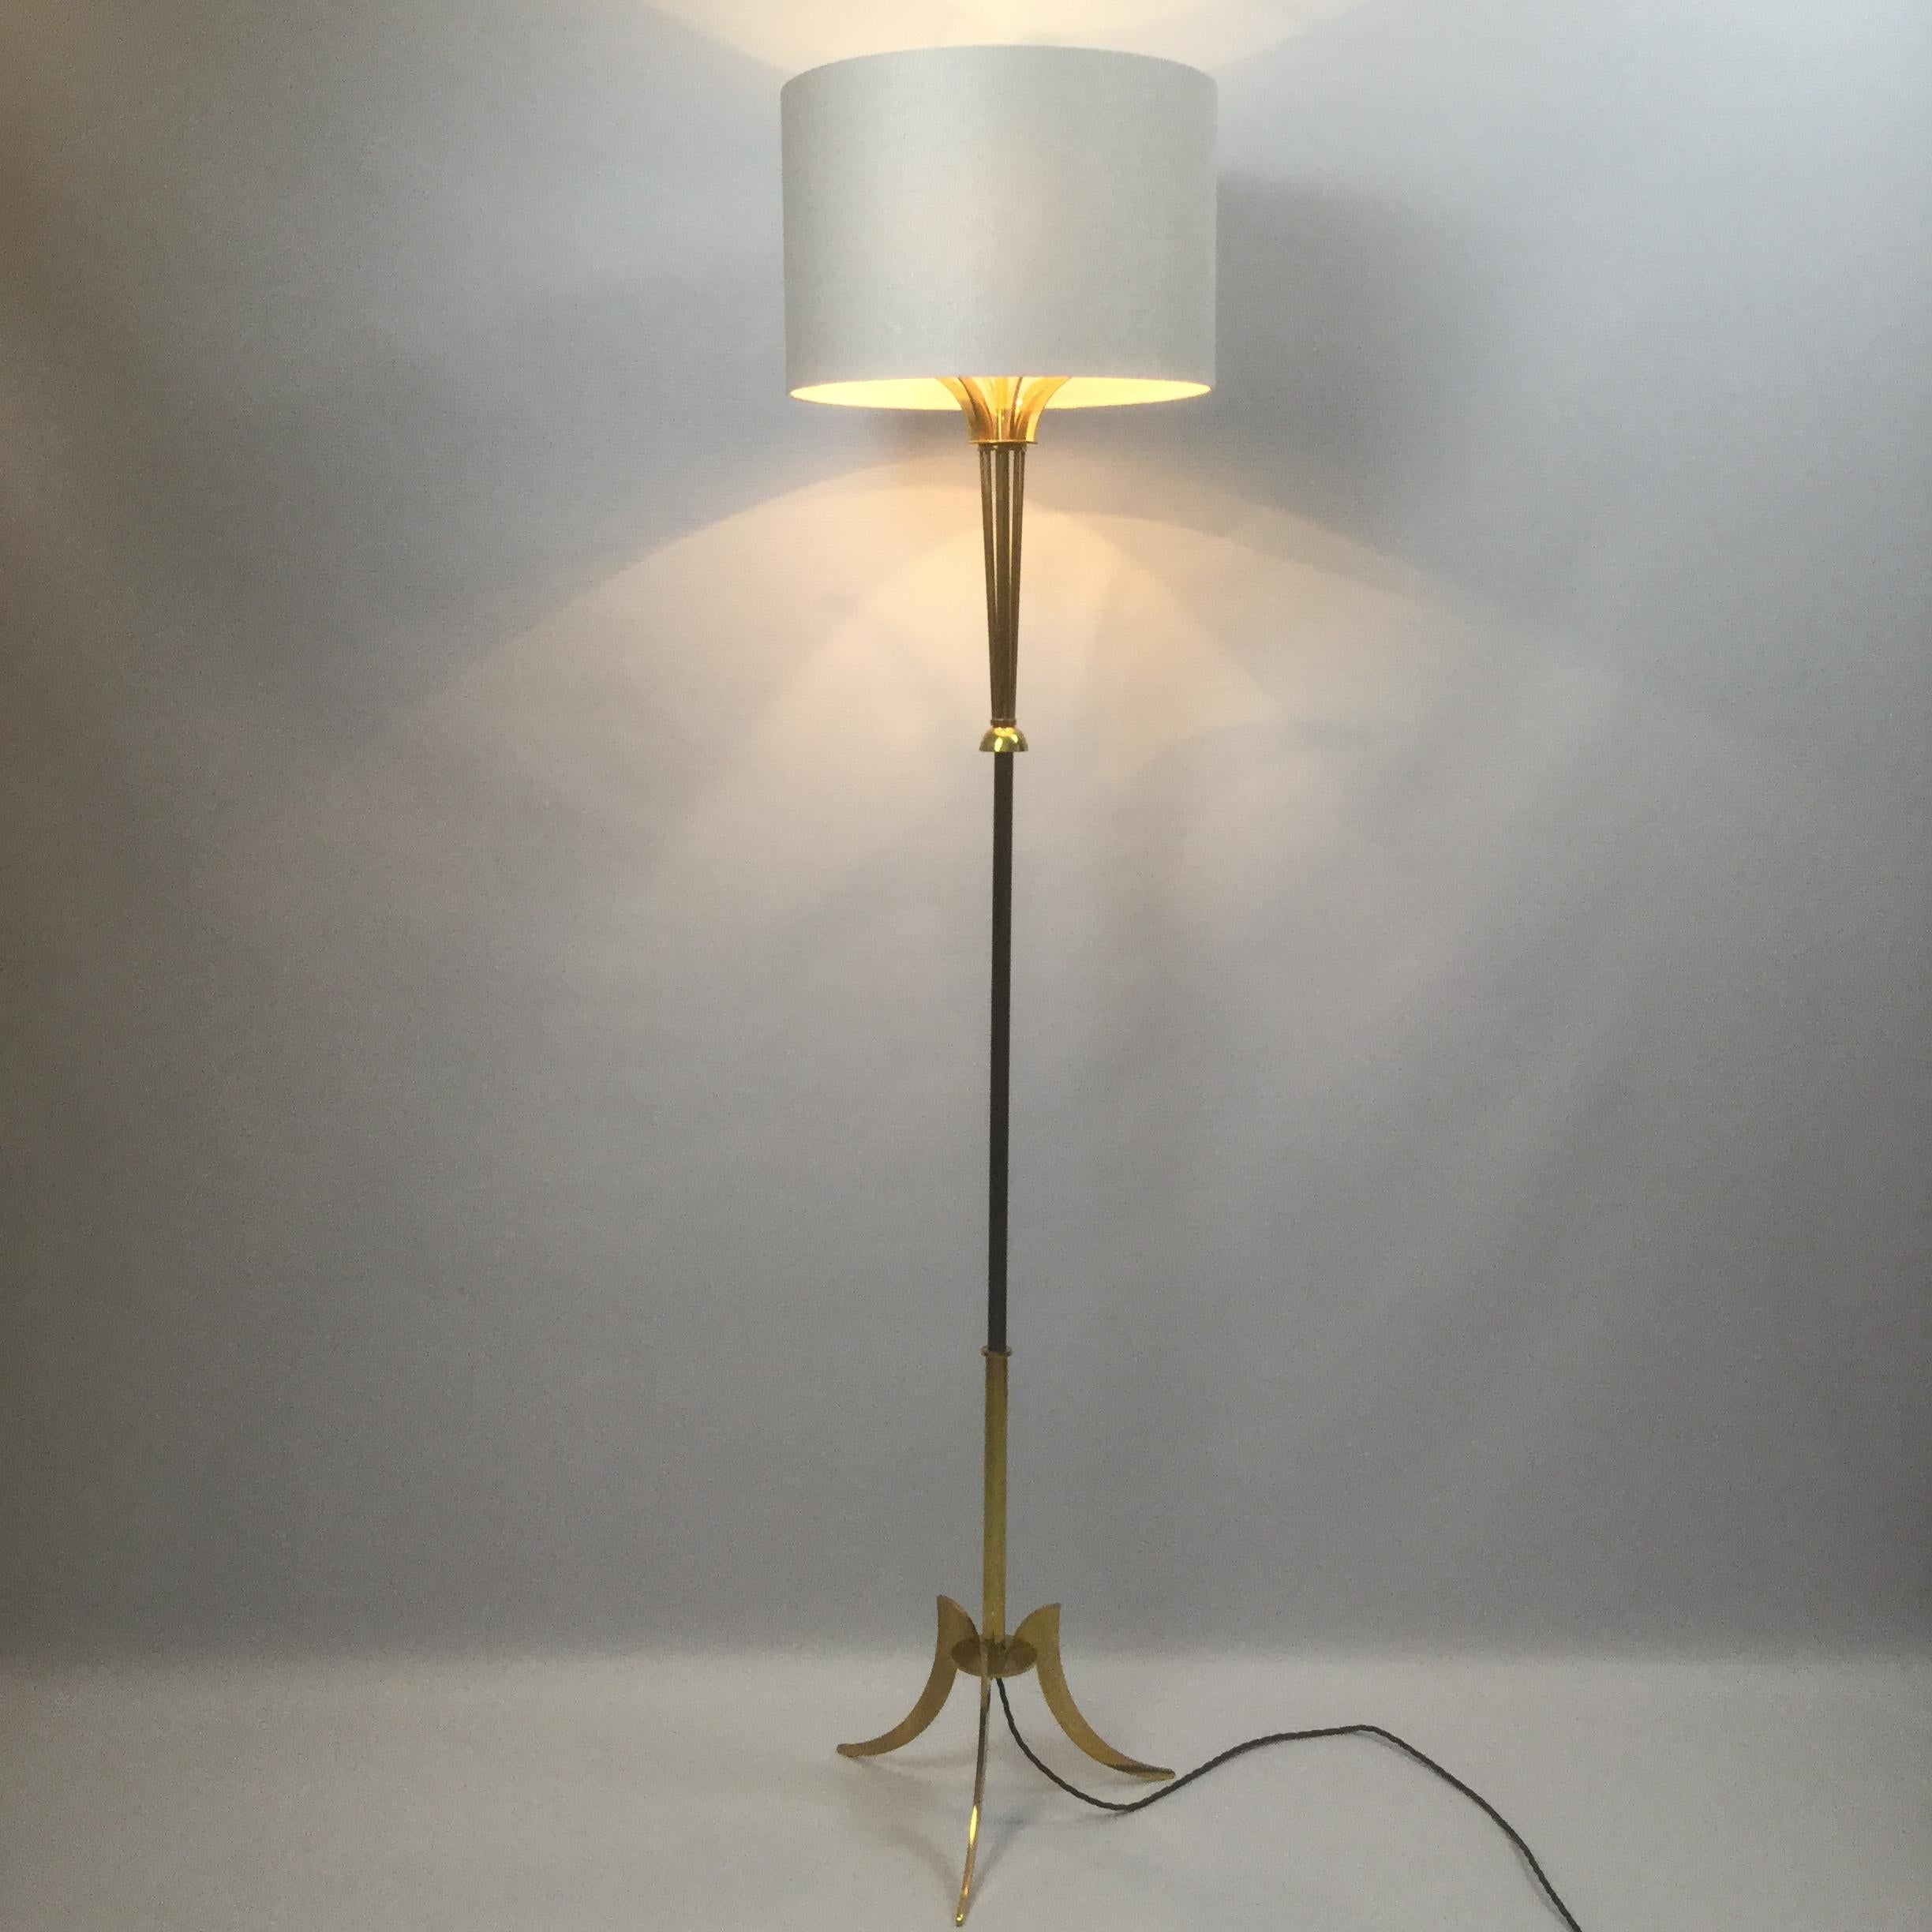 Brass lamp attributed to Maison Jansen
A pair is available
Rewired with black cotton-insulated cable.